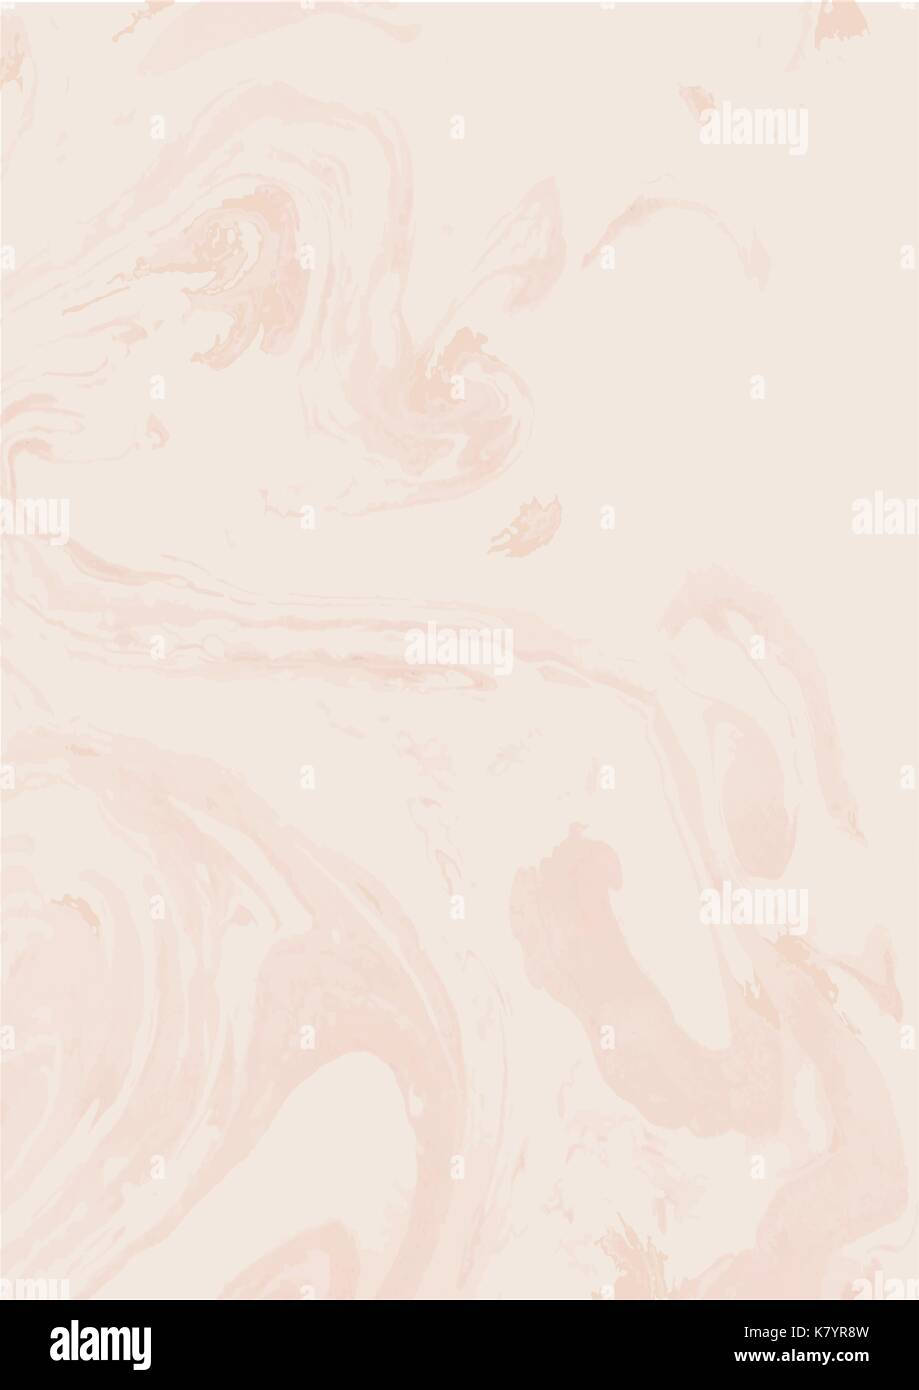 A Pink Marble Background With Swirls And Swirls - Stock Image Wallpaper